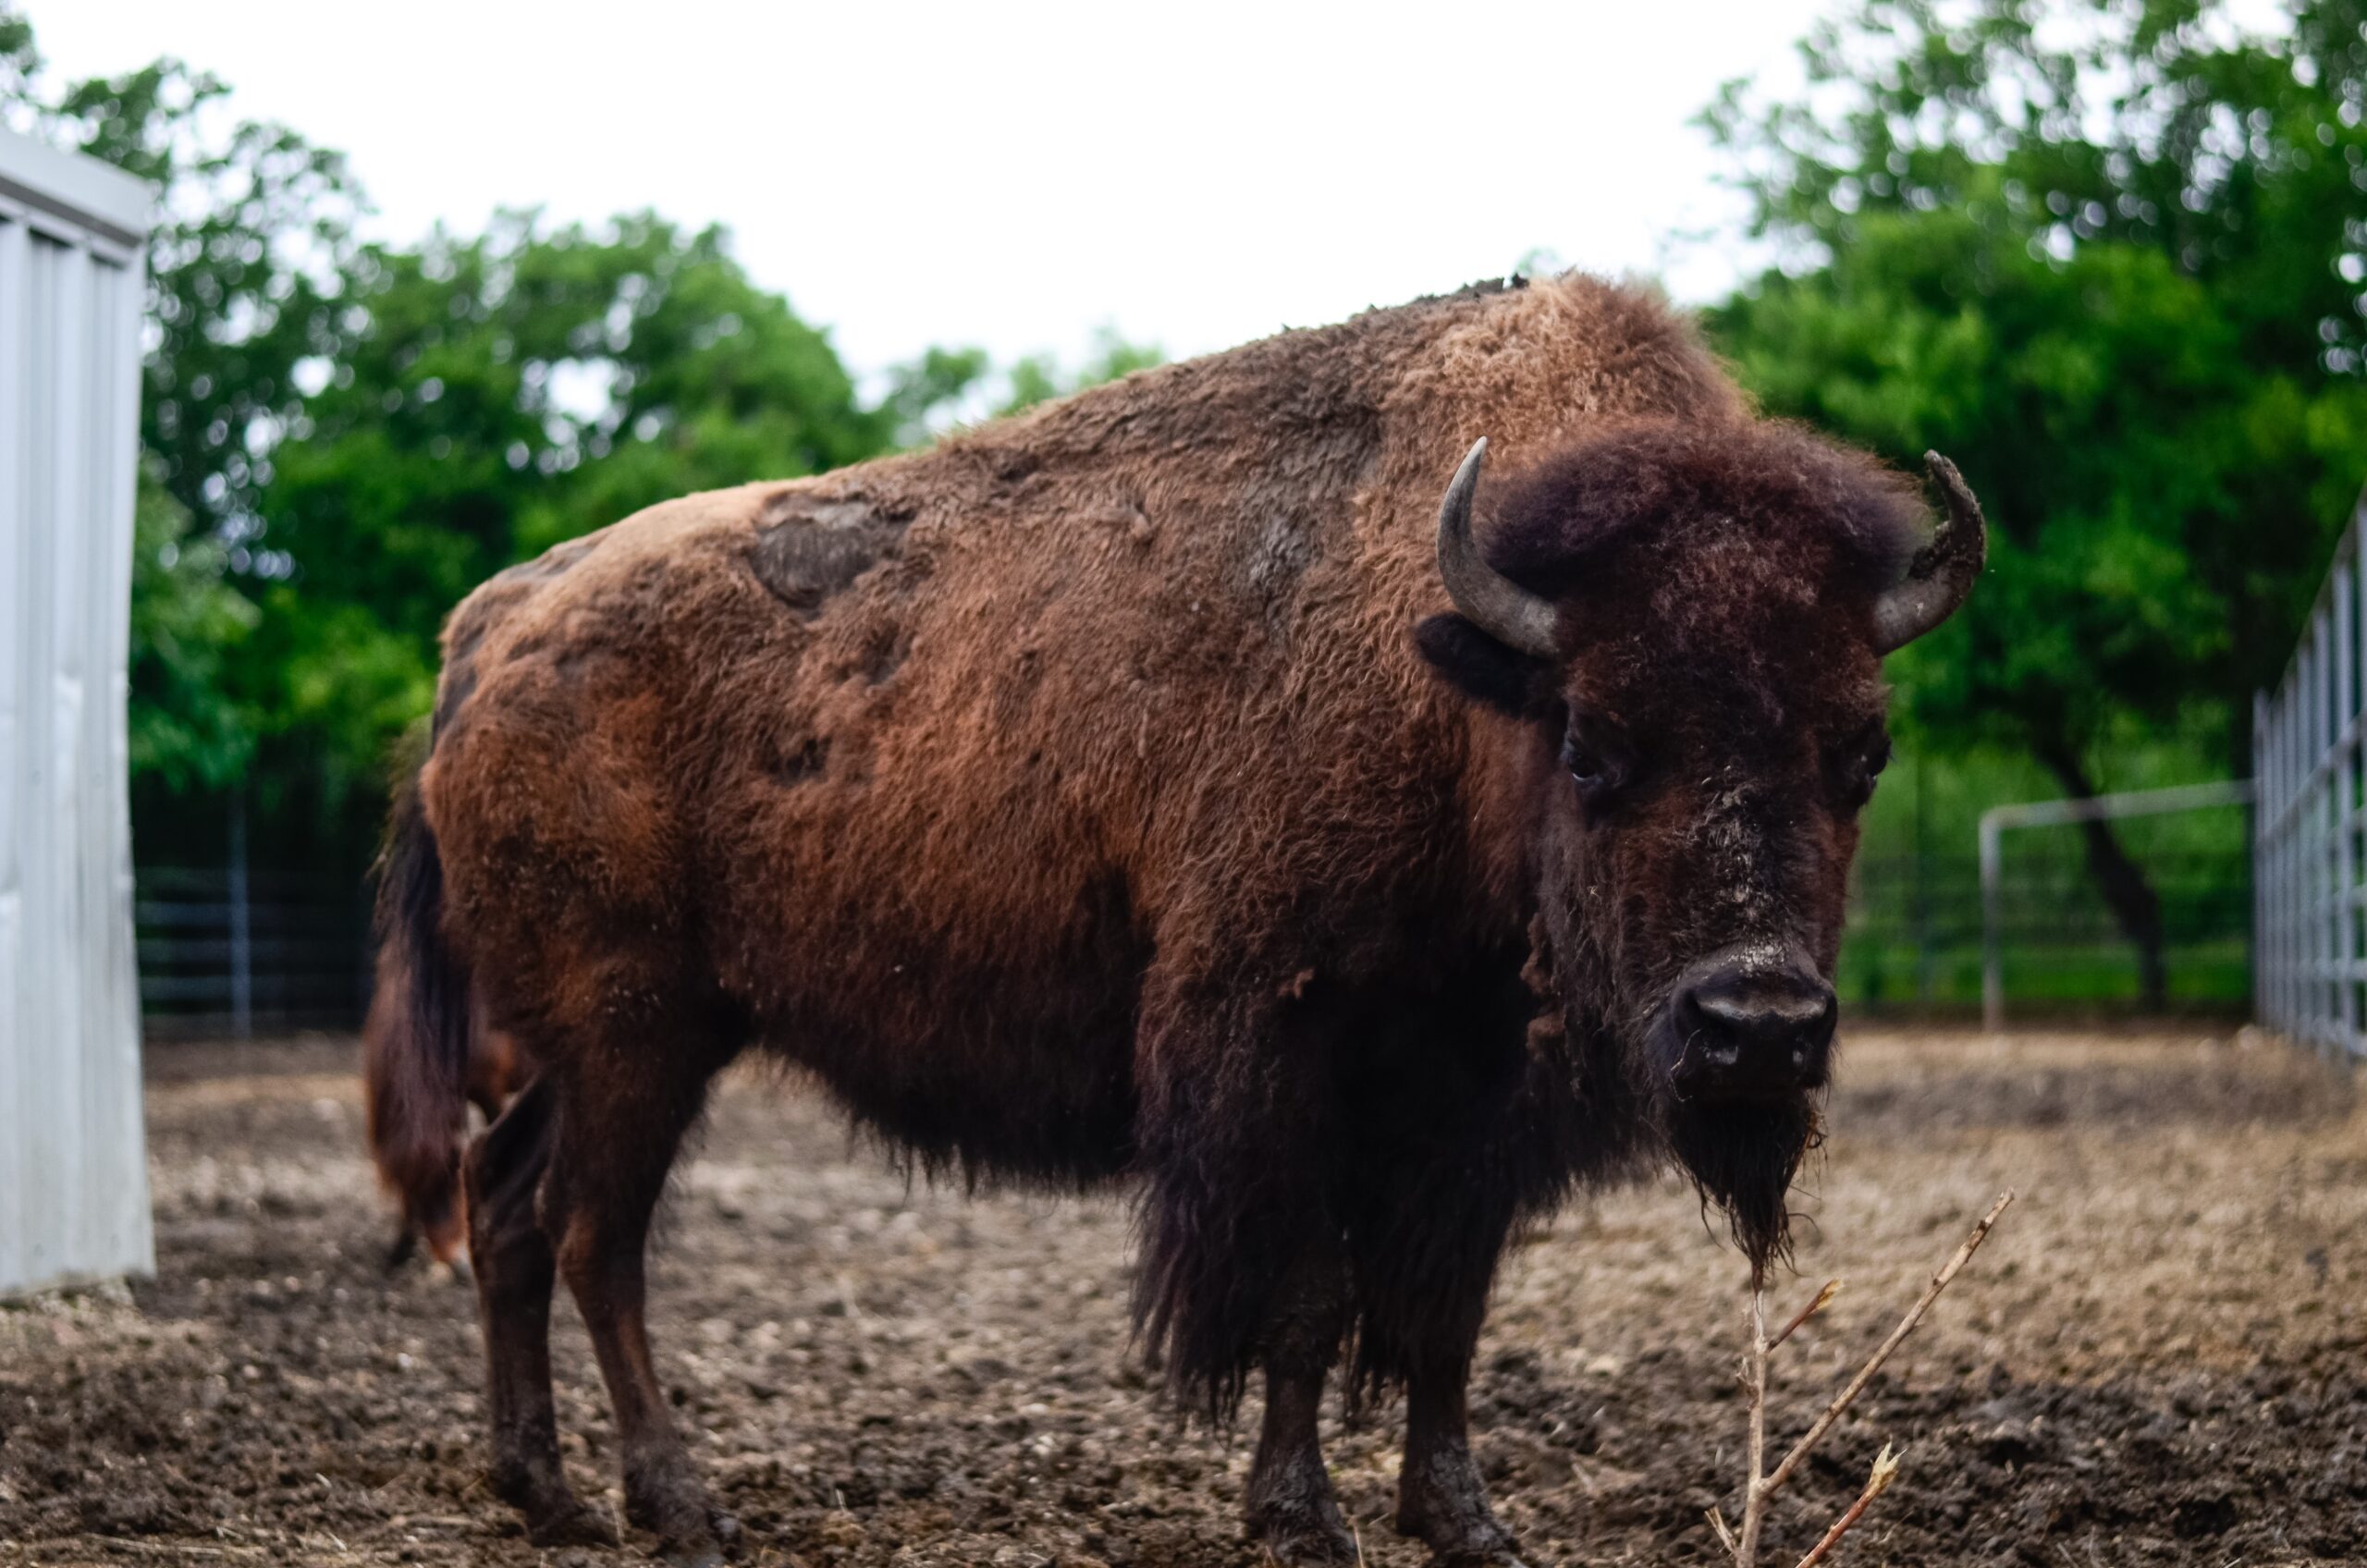 November's Featured Animal: The North American Bison